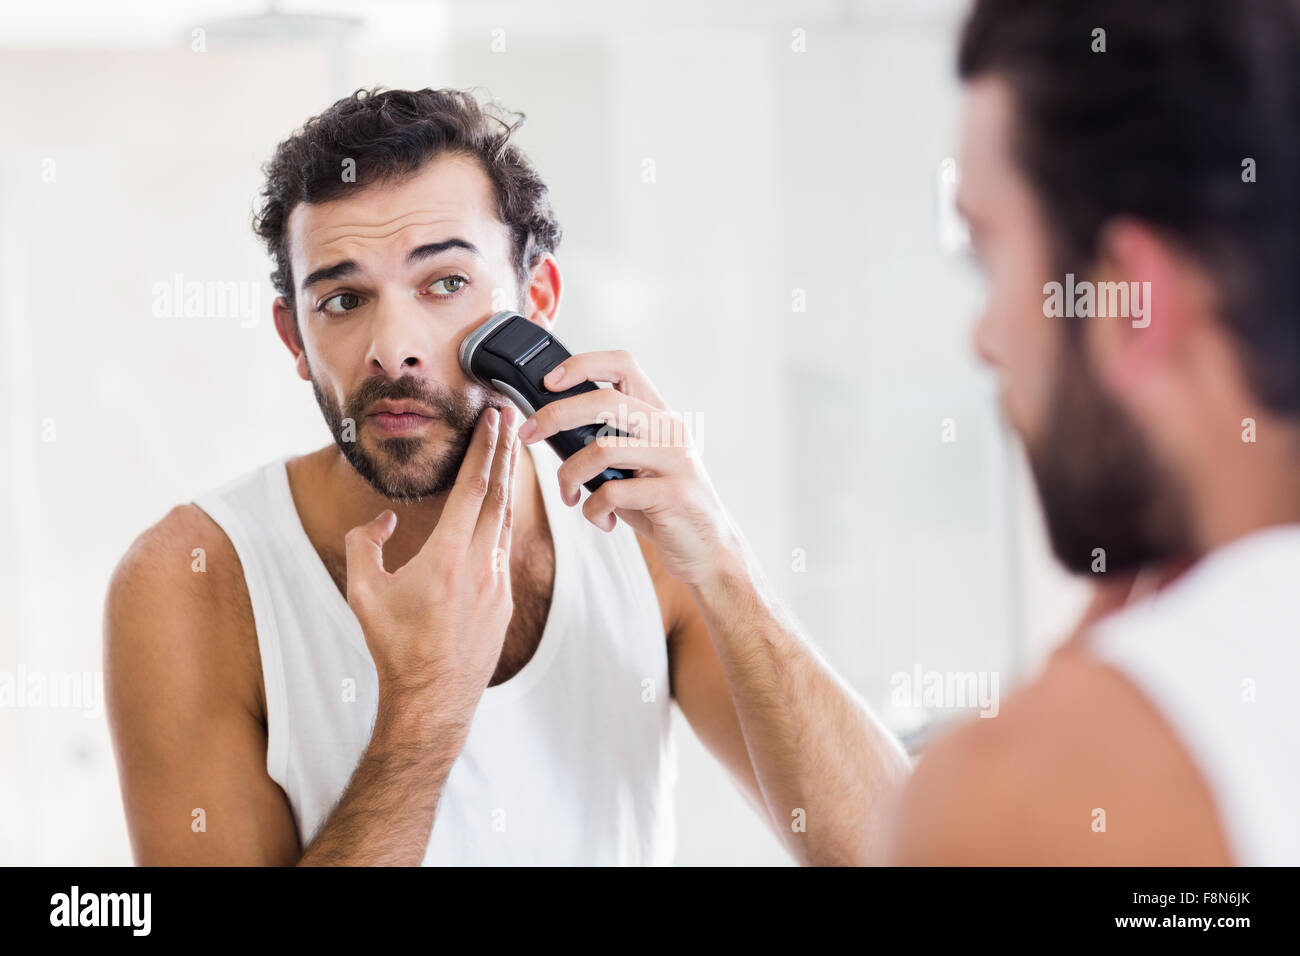 Reflection of concentrated man shaving with electric razor Stock Photo